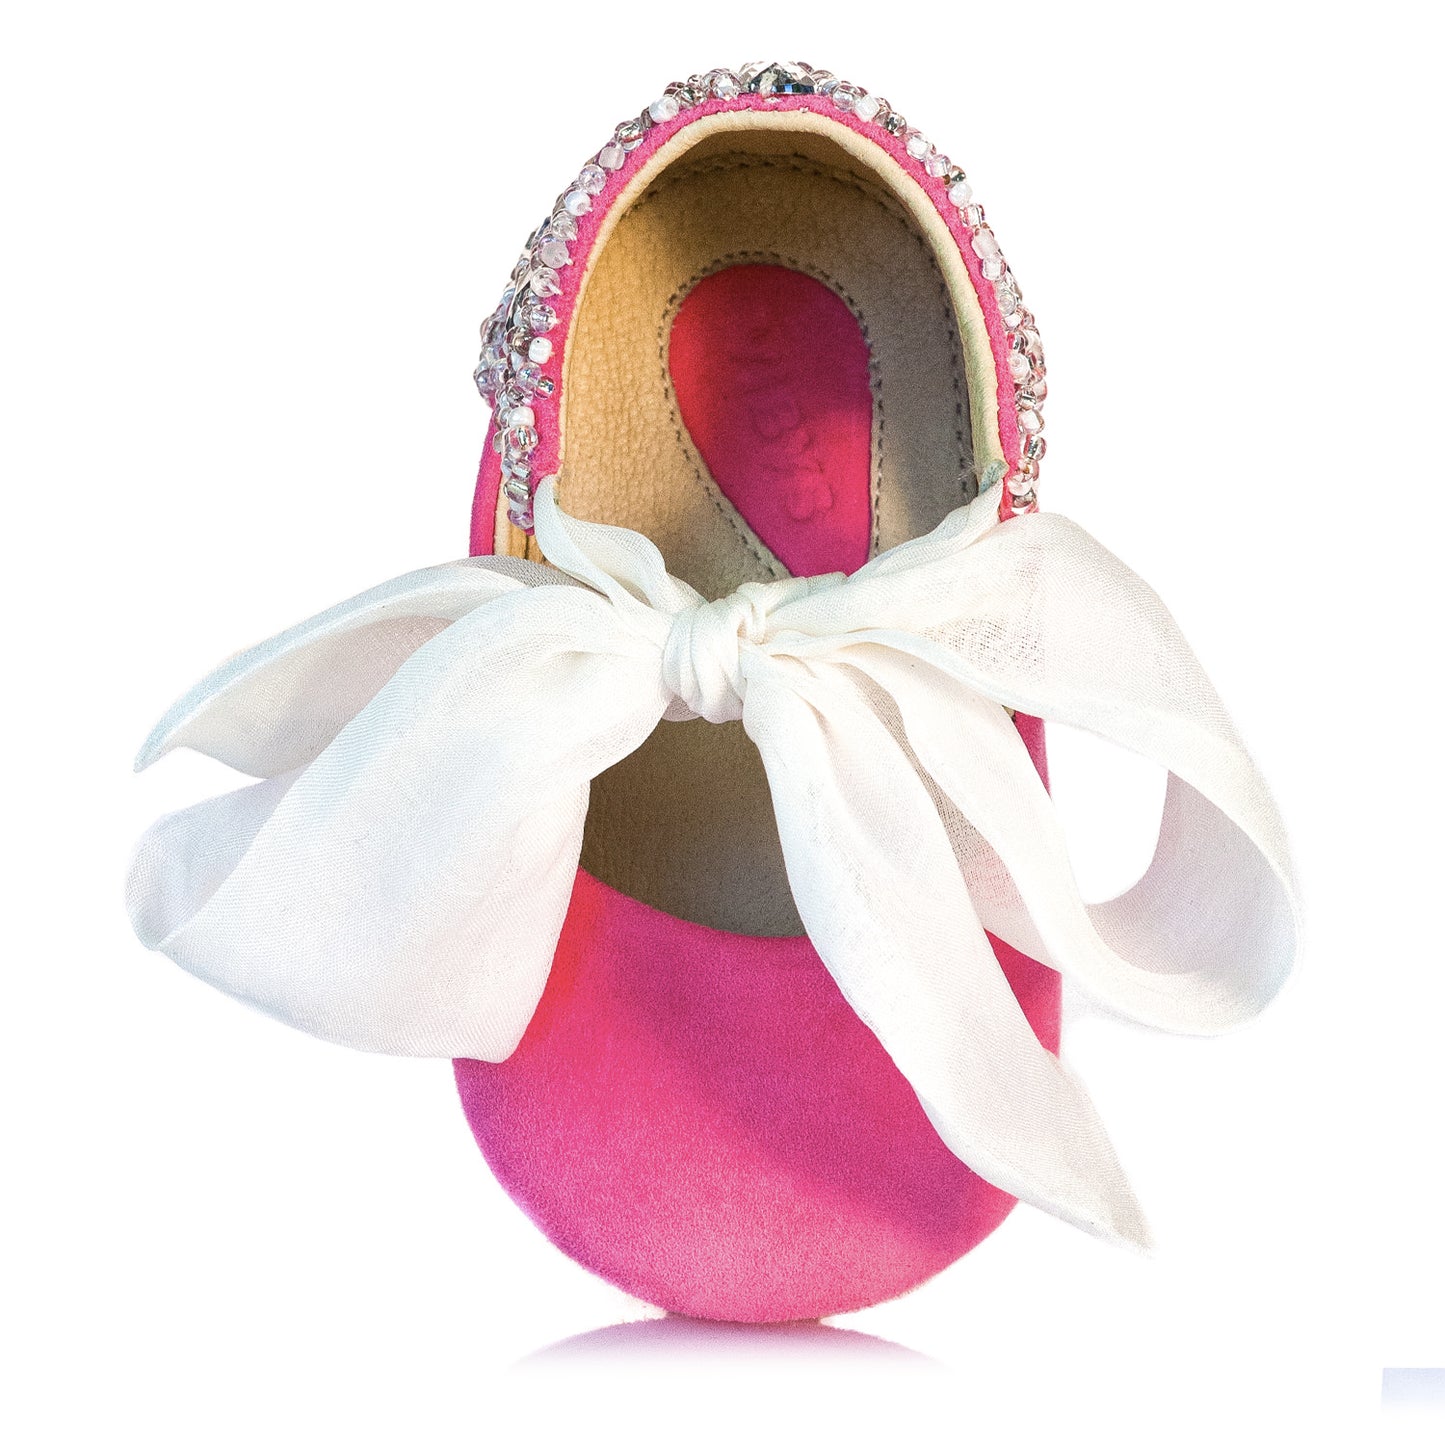 VIBYS Aurora pink soft leather baby ballerinas with crystals and white silk bow